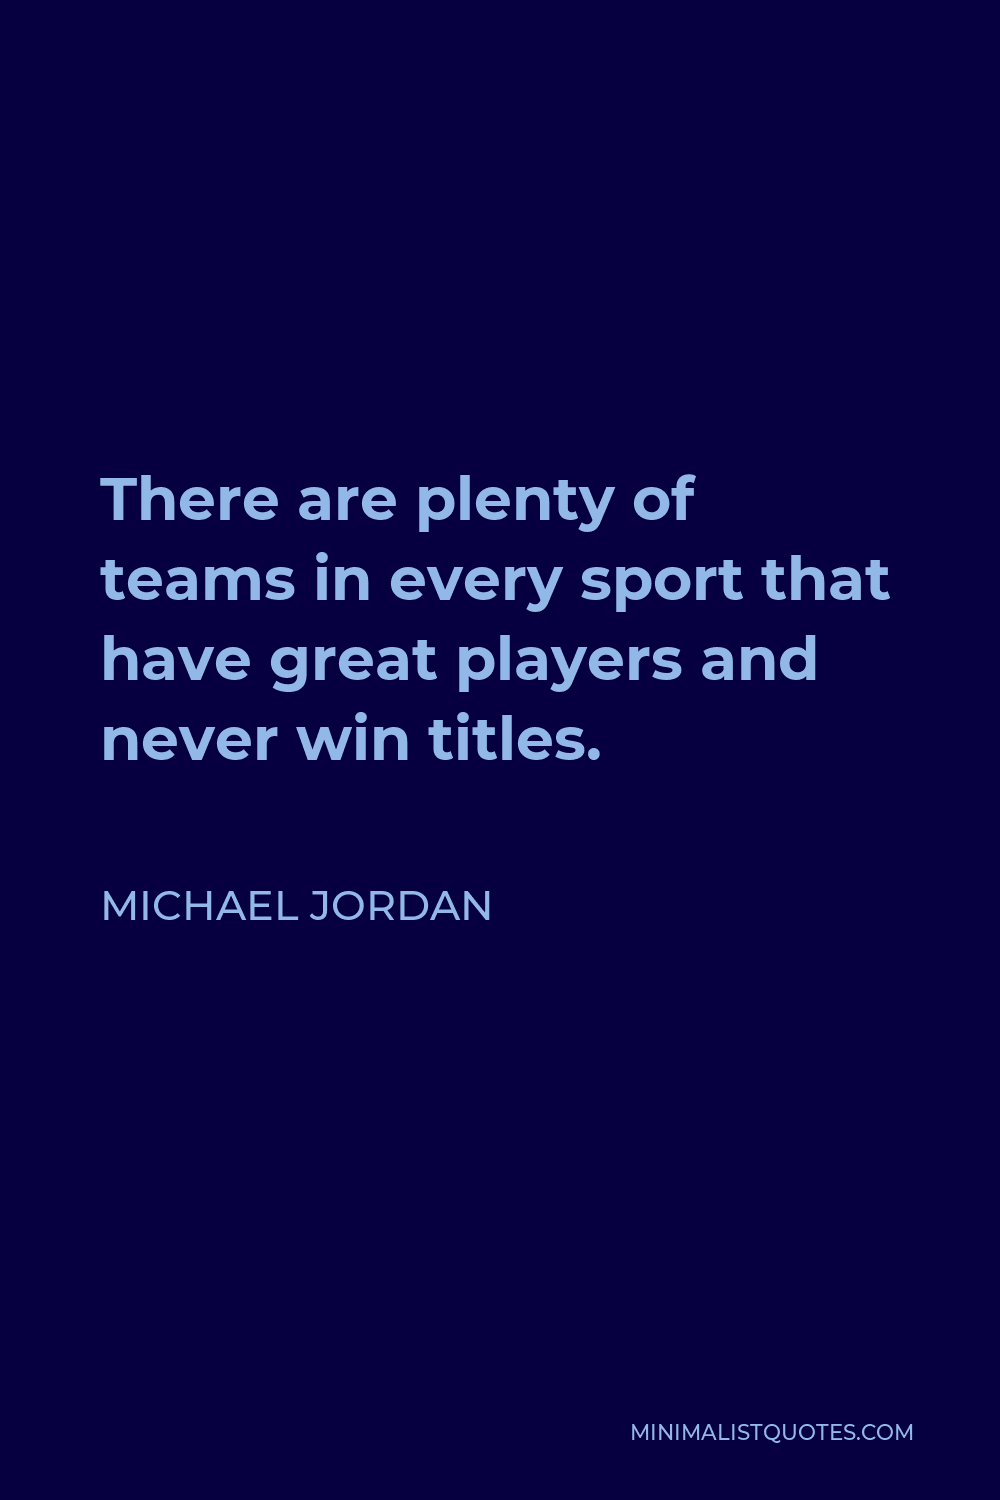 Michael Jordan Quote - There are plenty of teams in every sport that have great players and never win titles.